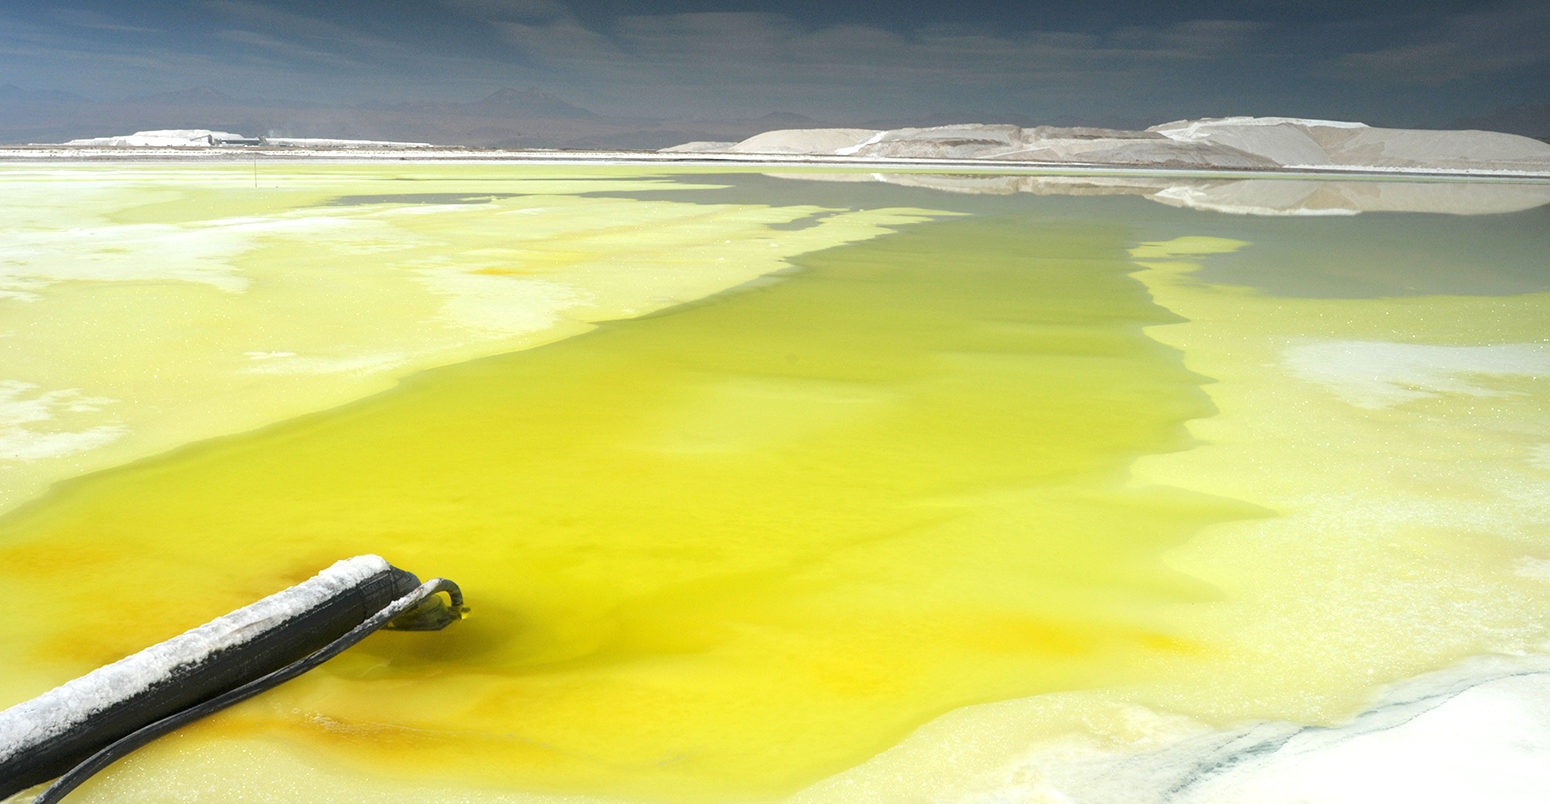 A pond to extract lithium from salt in Atacama Desert, North of Chile. Credit: Diego Giudice / Alamy Stock Photo. BNKX1X